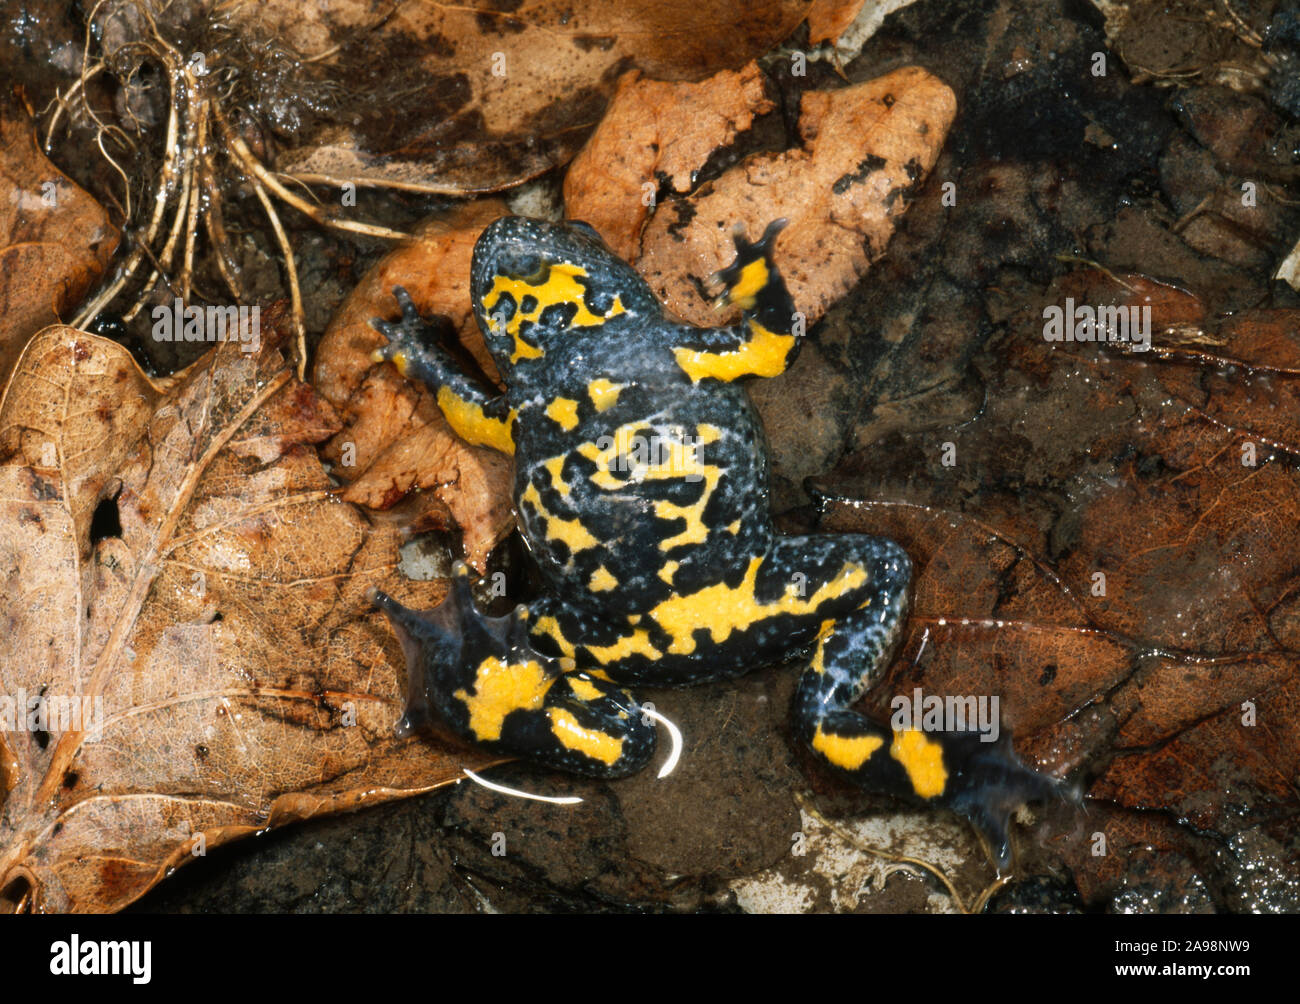 YELLOW-BELLIED TOAD ( Bombina variegata).  In a defensive position, ventral surface uppermost, with yellow belly markings revealed.  Hungary Stock Photo